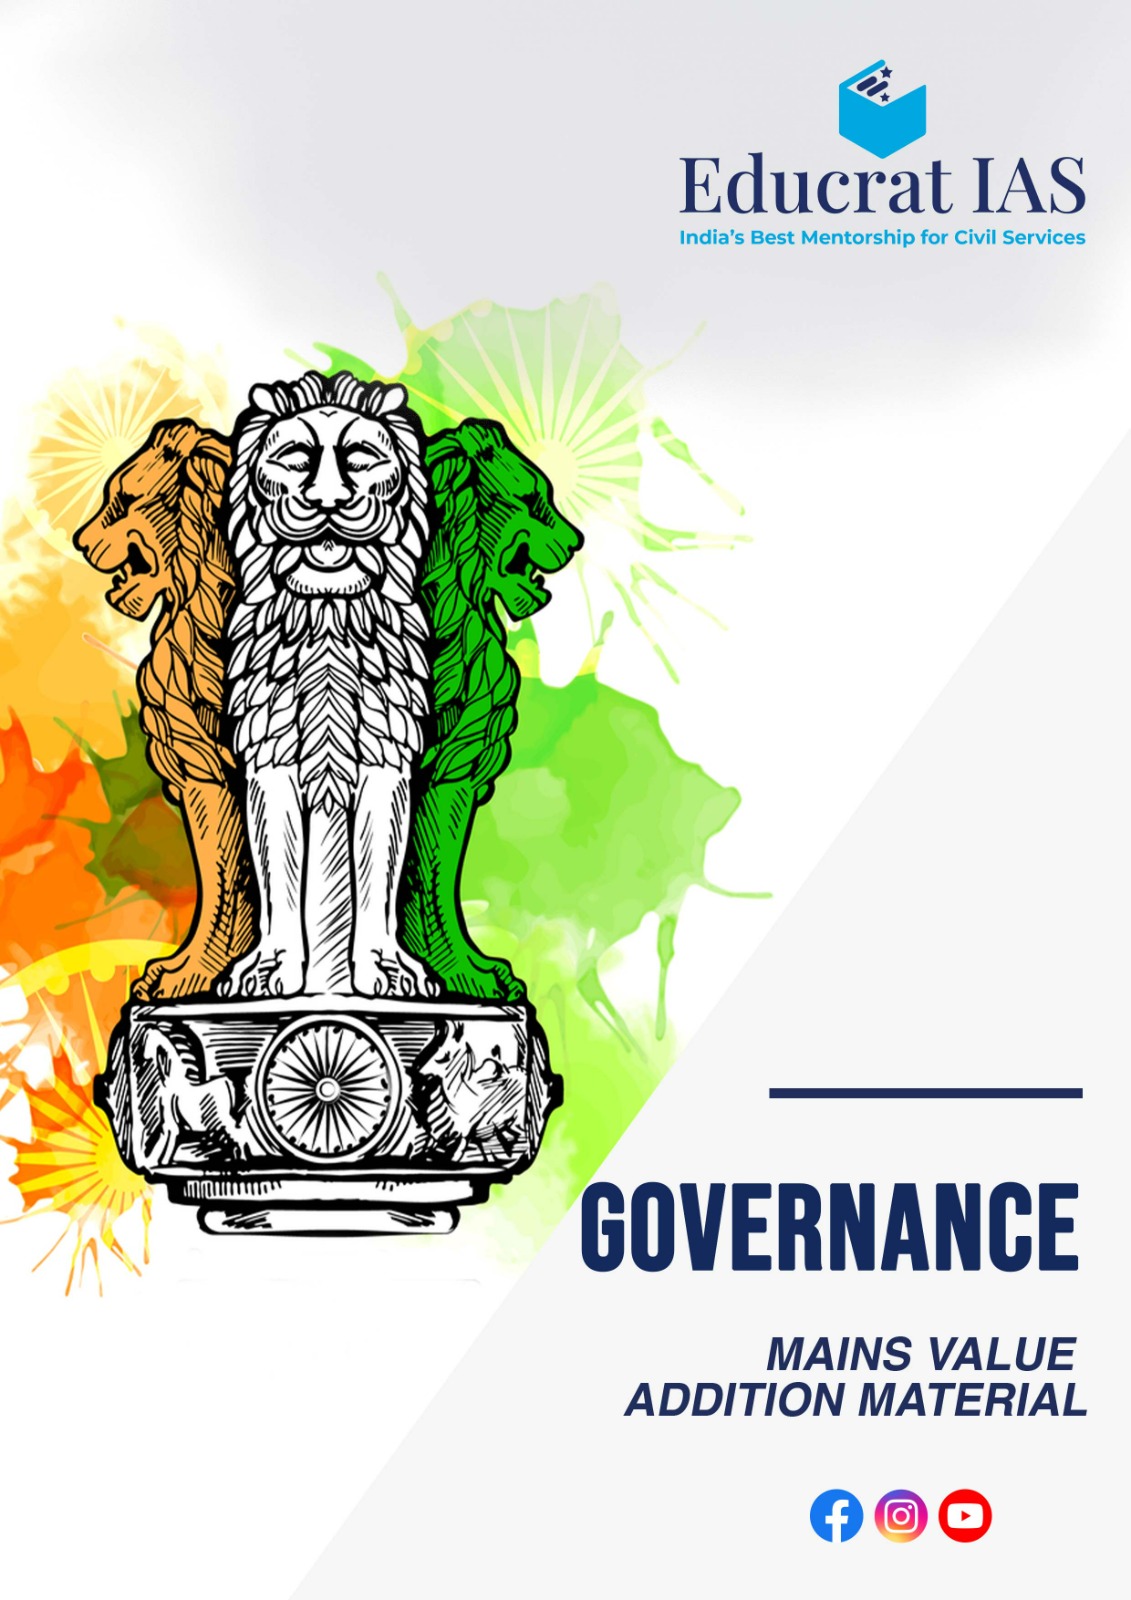 Governance - Mains Value Addition Material